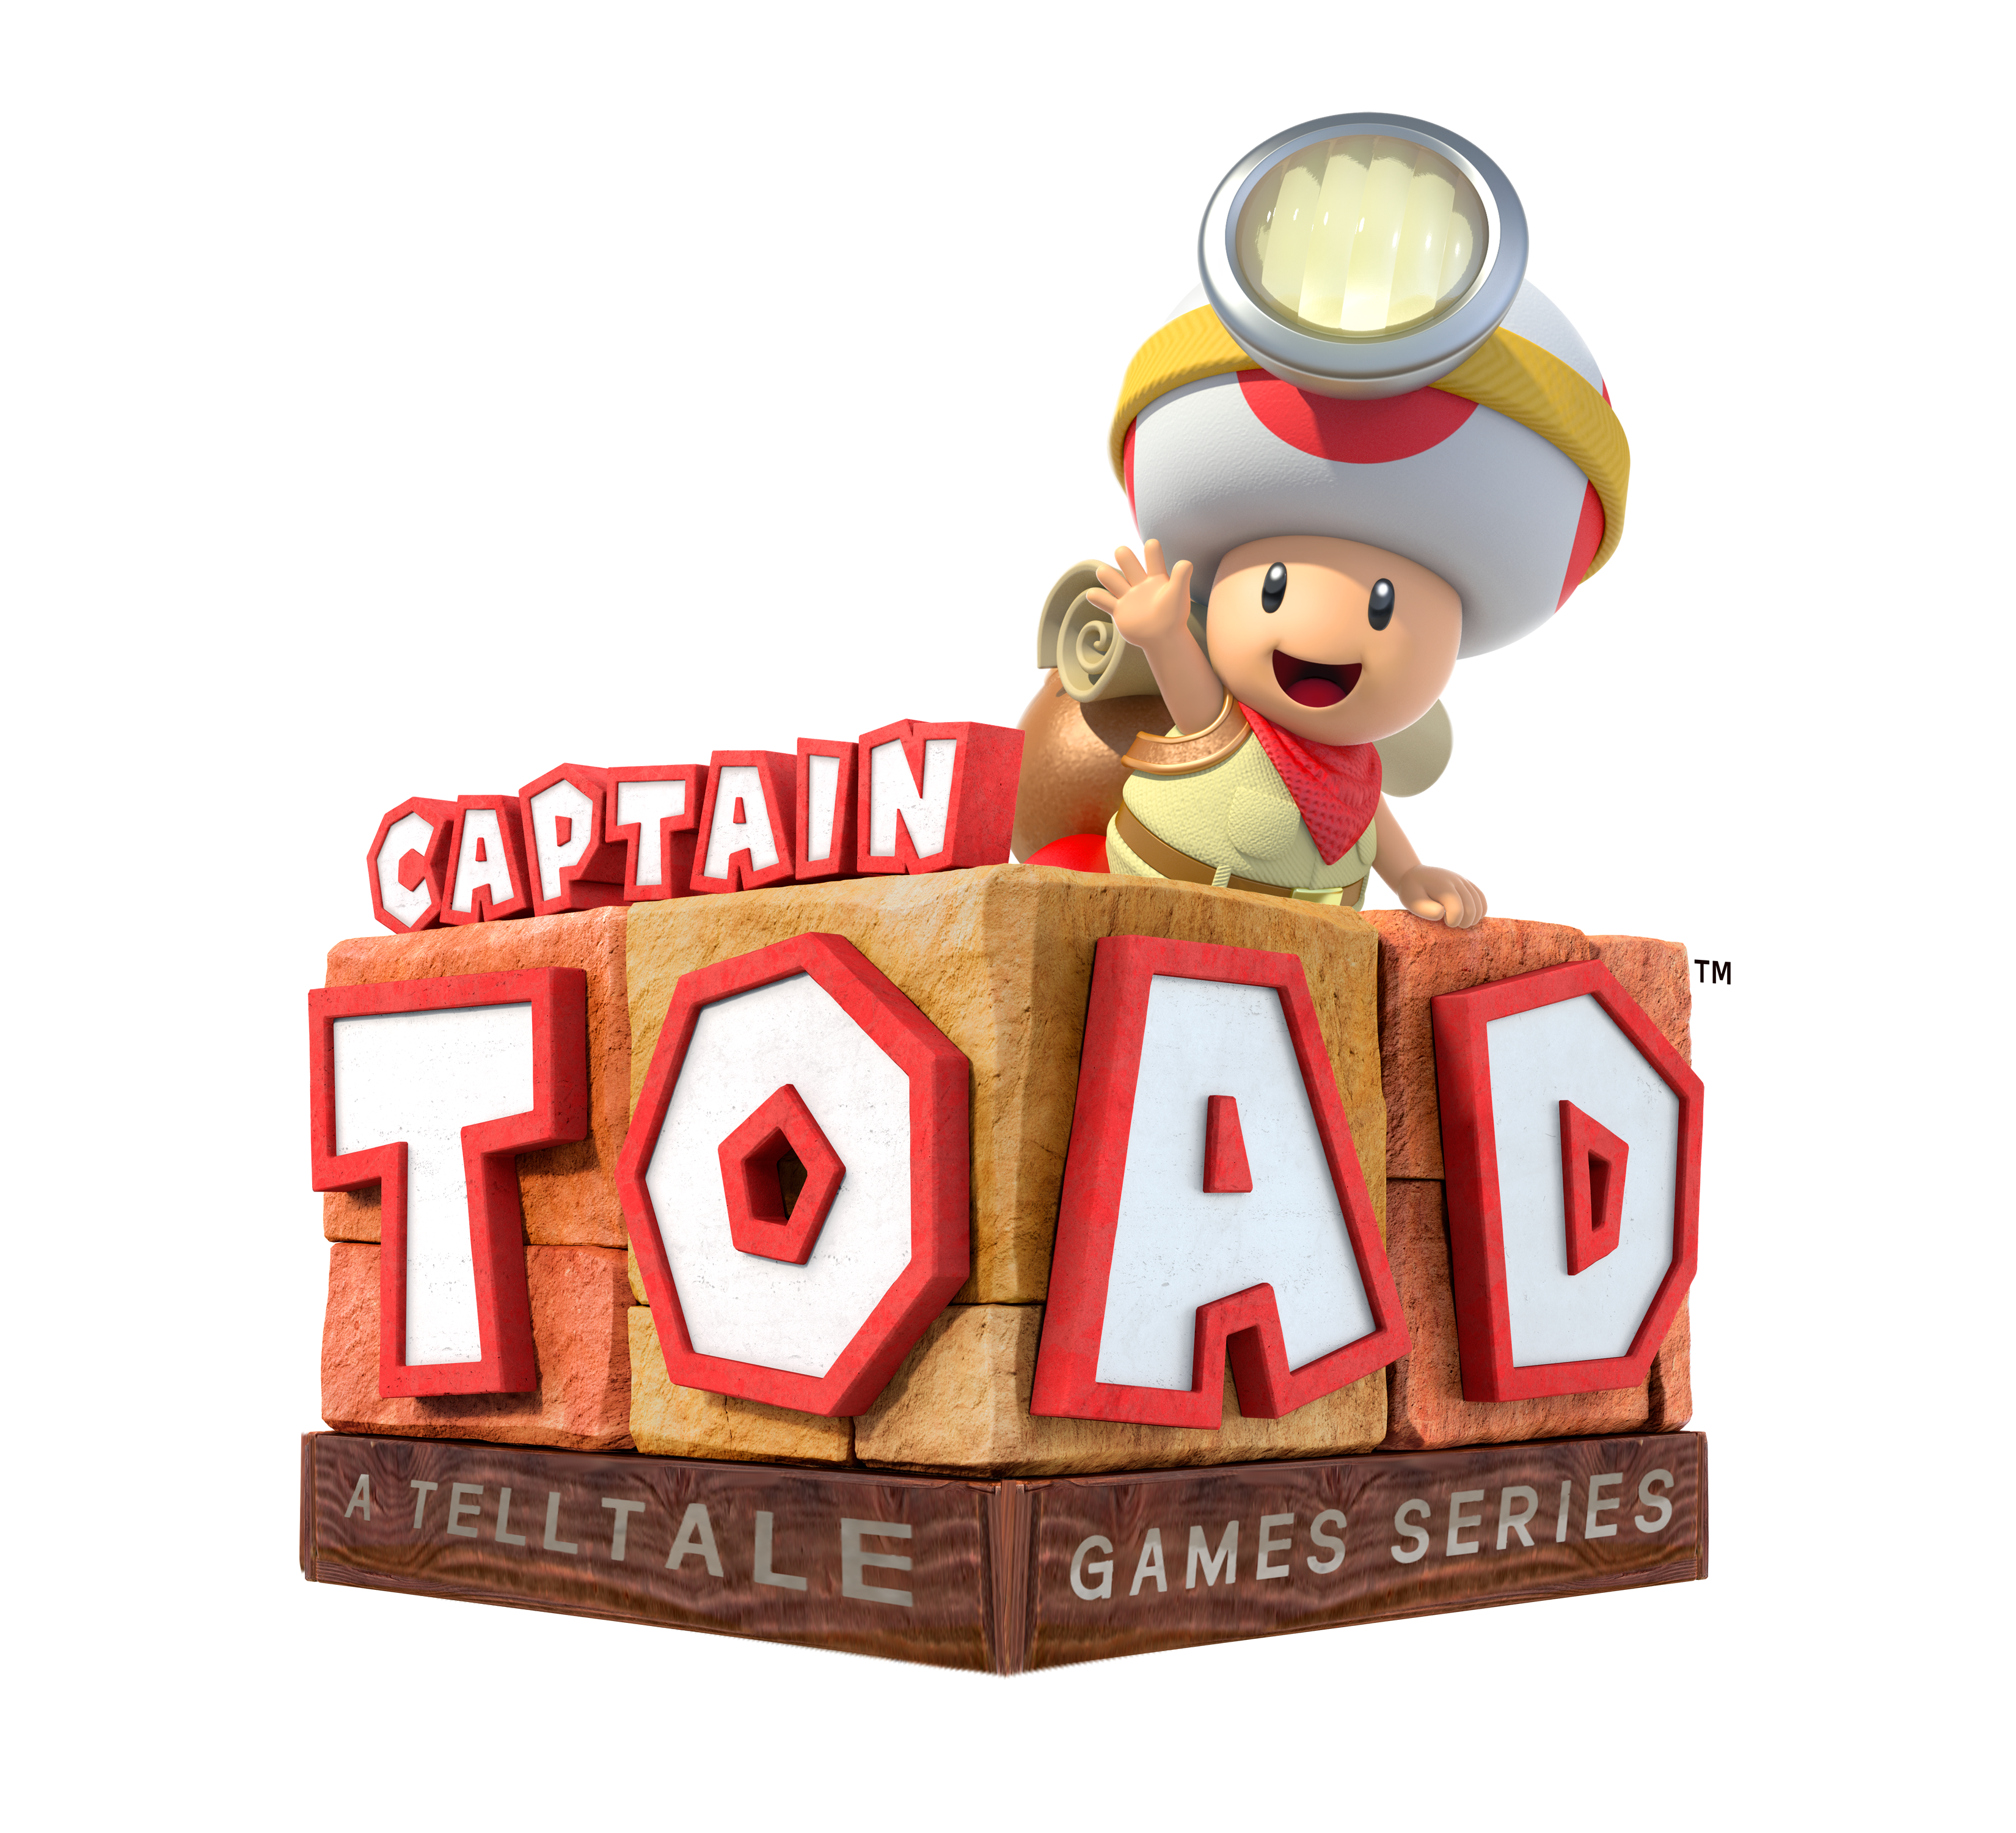 free download toad game nintendo switch